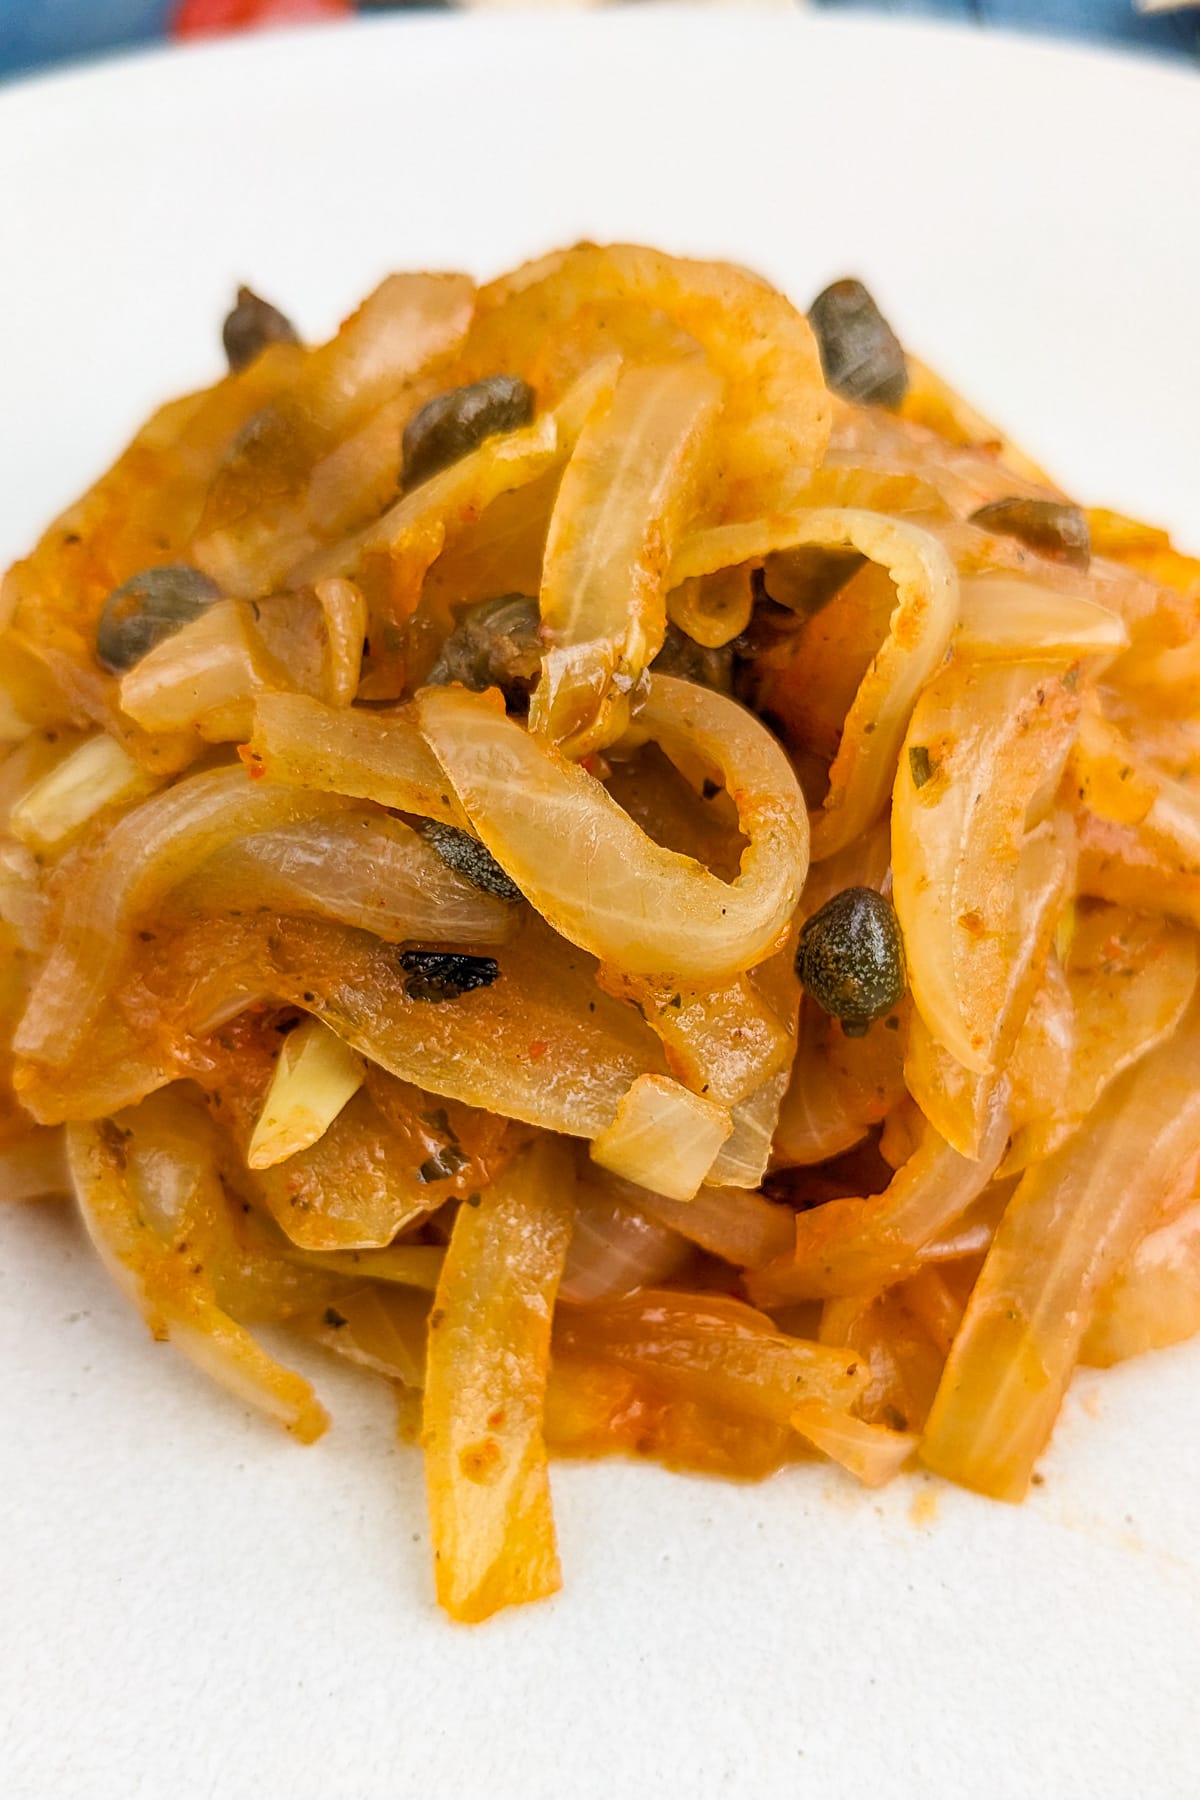 A close look at stewed onions with cappers on a white plate.